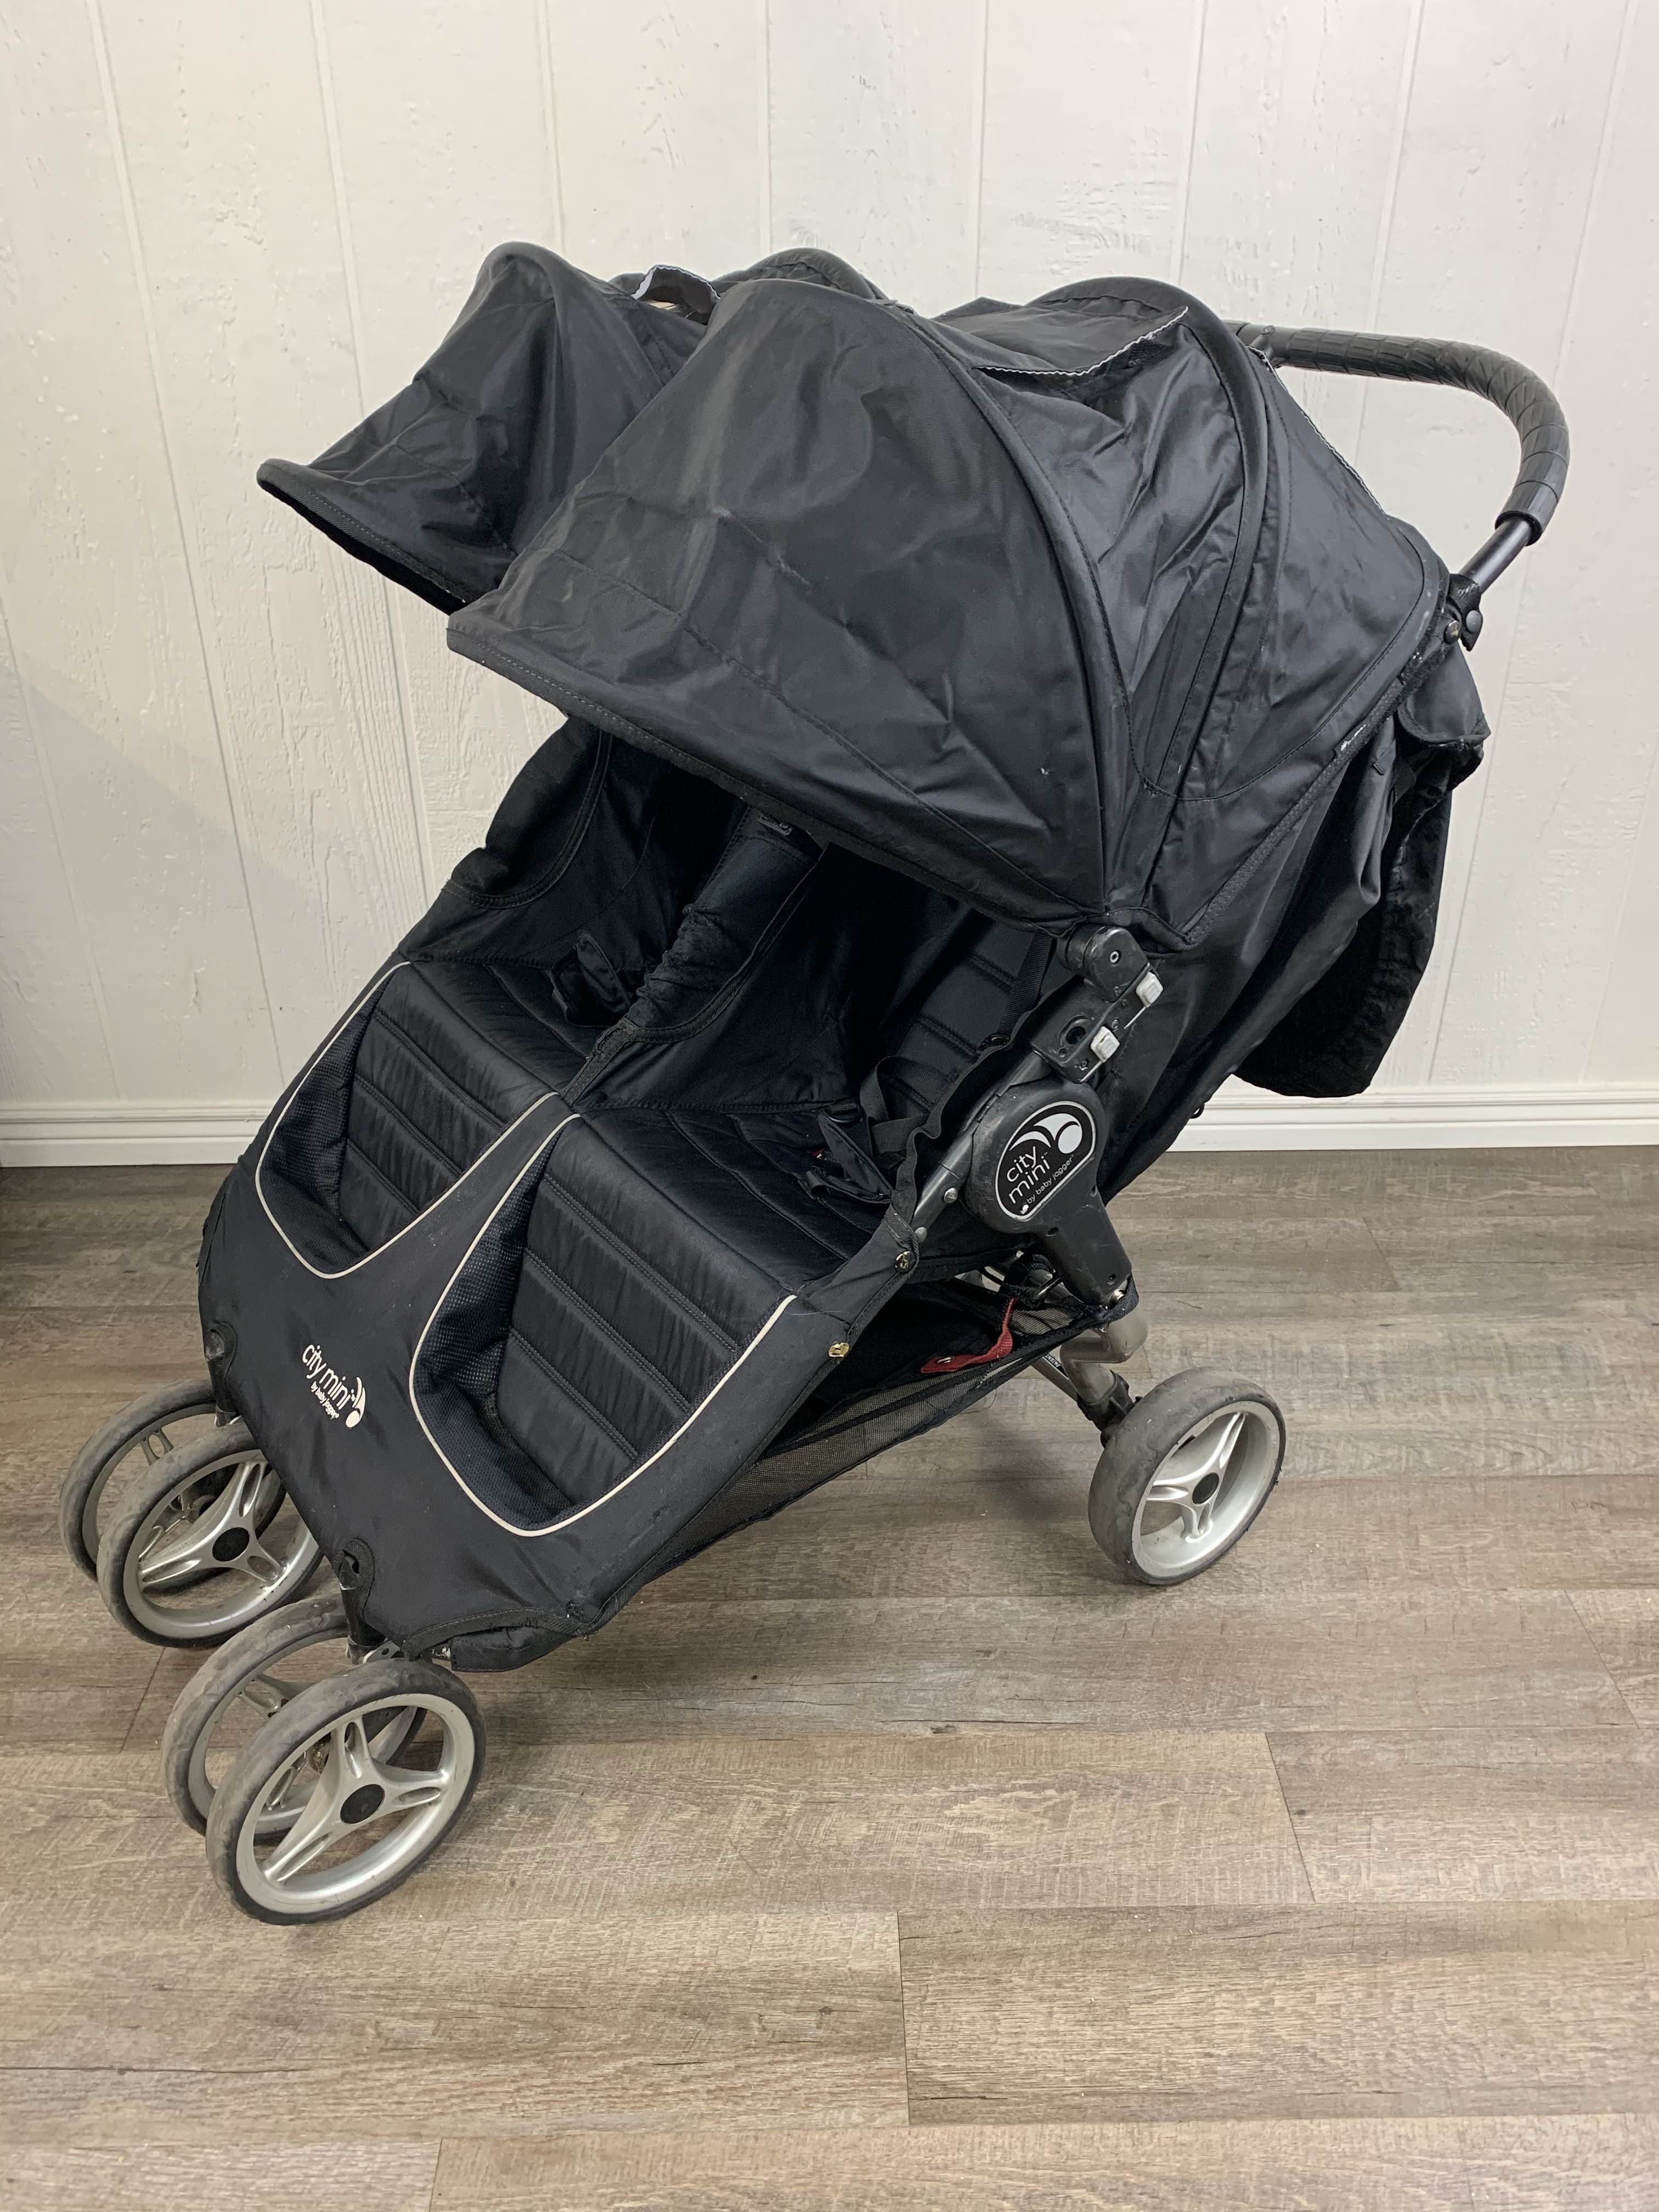 used baby jogger double stroller